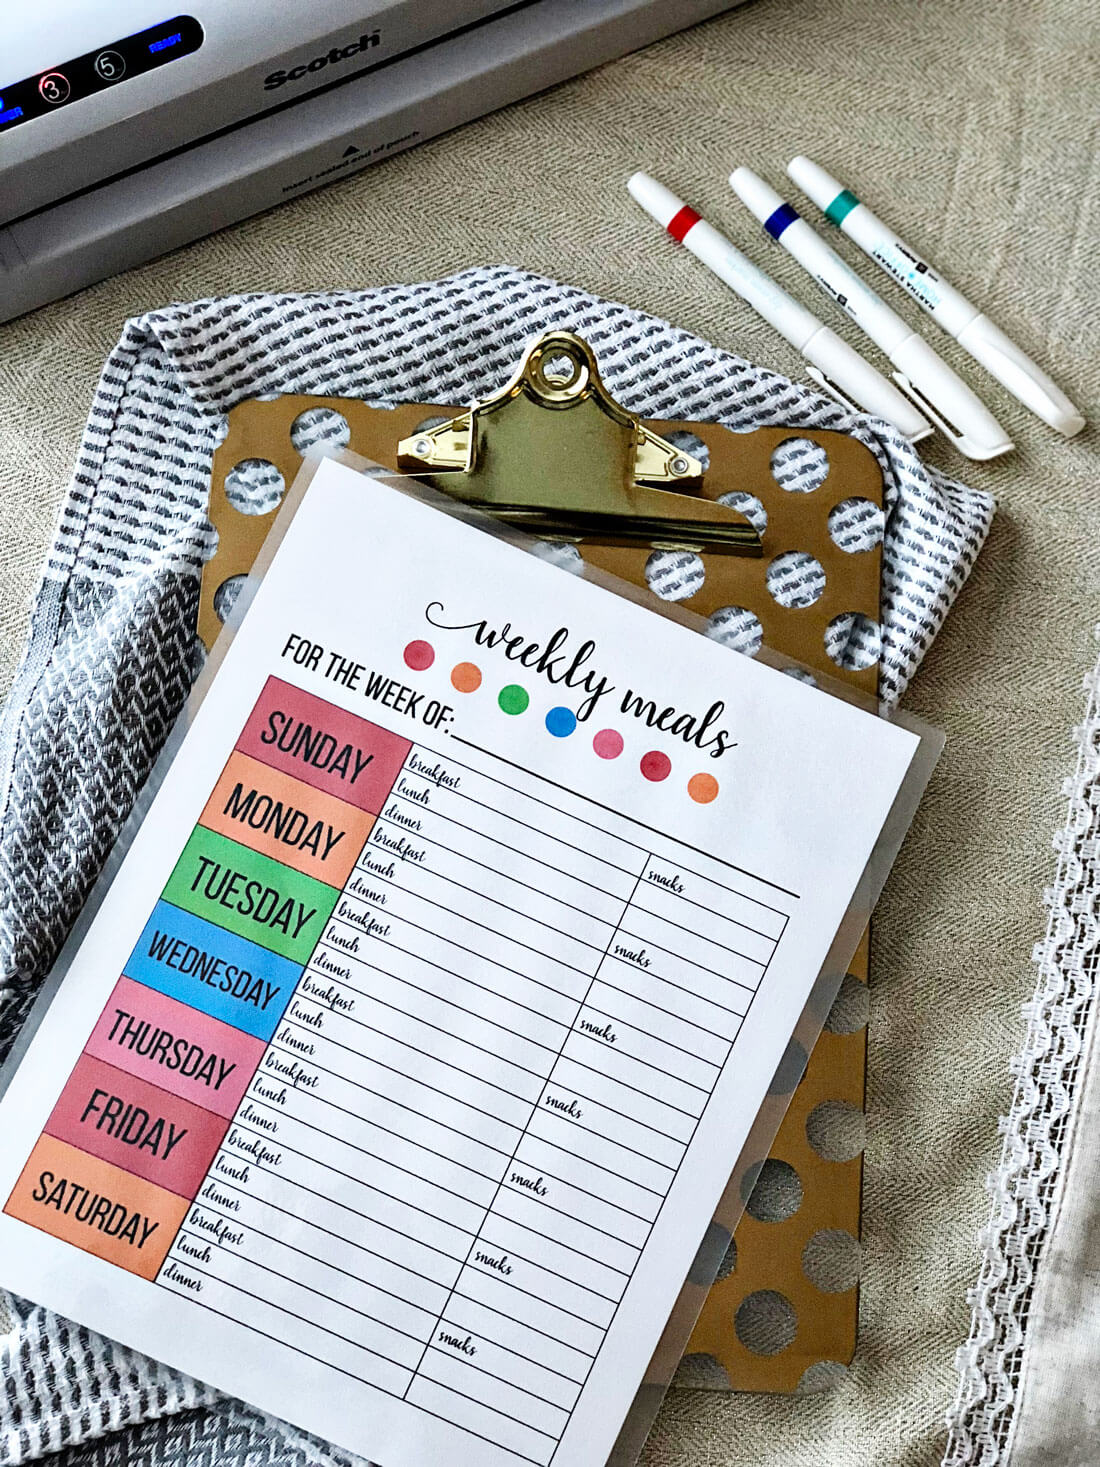 Printable Weekly Meal Planner - use this to get your calendar ready for meal prep. www.thirtyhandmadedays.com